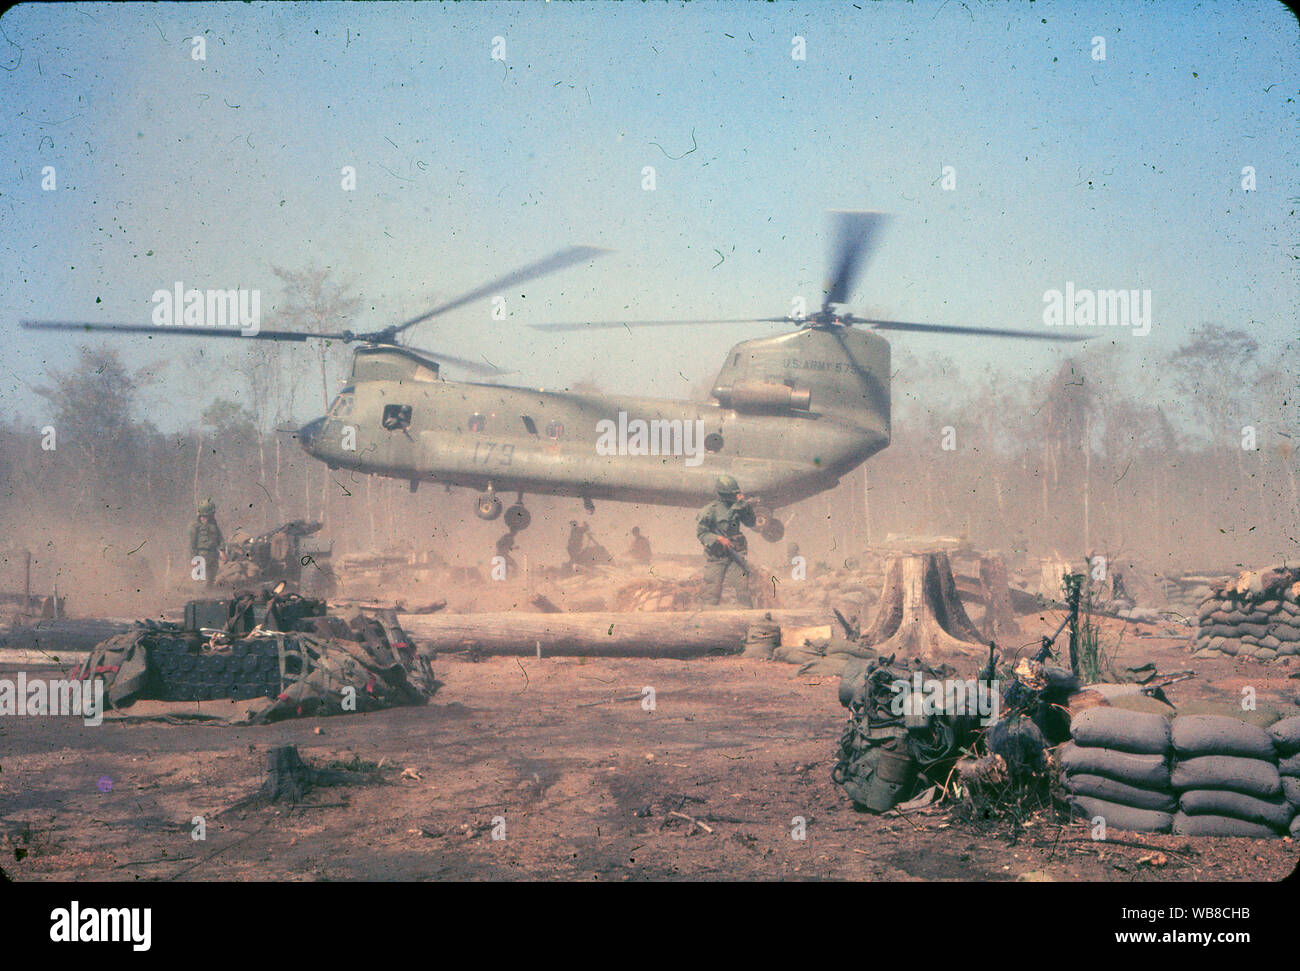 A US Army Chinook helicopter lifts off from a forward military base during the Vietnam War in 1966. Stock Photo